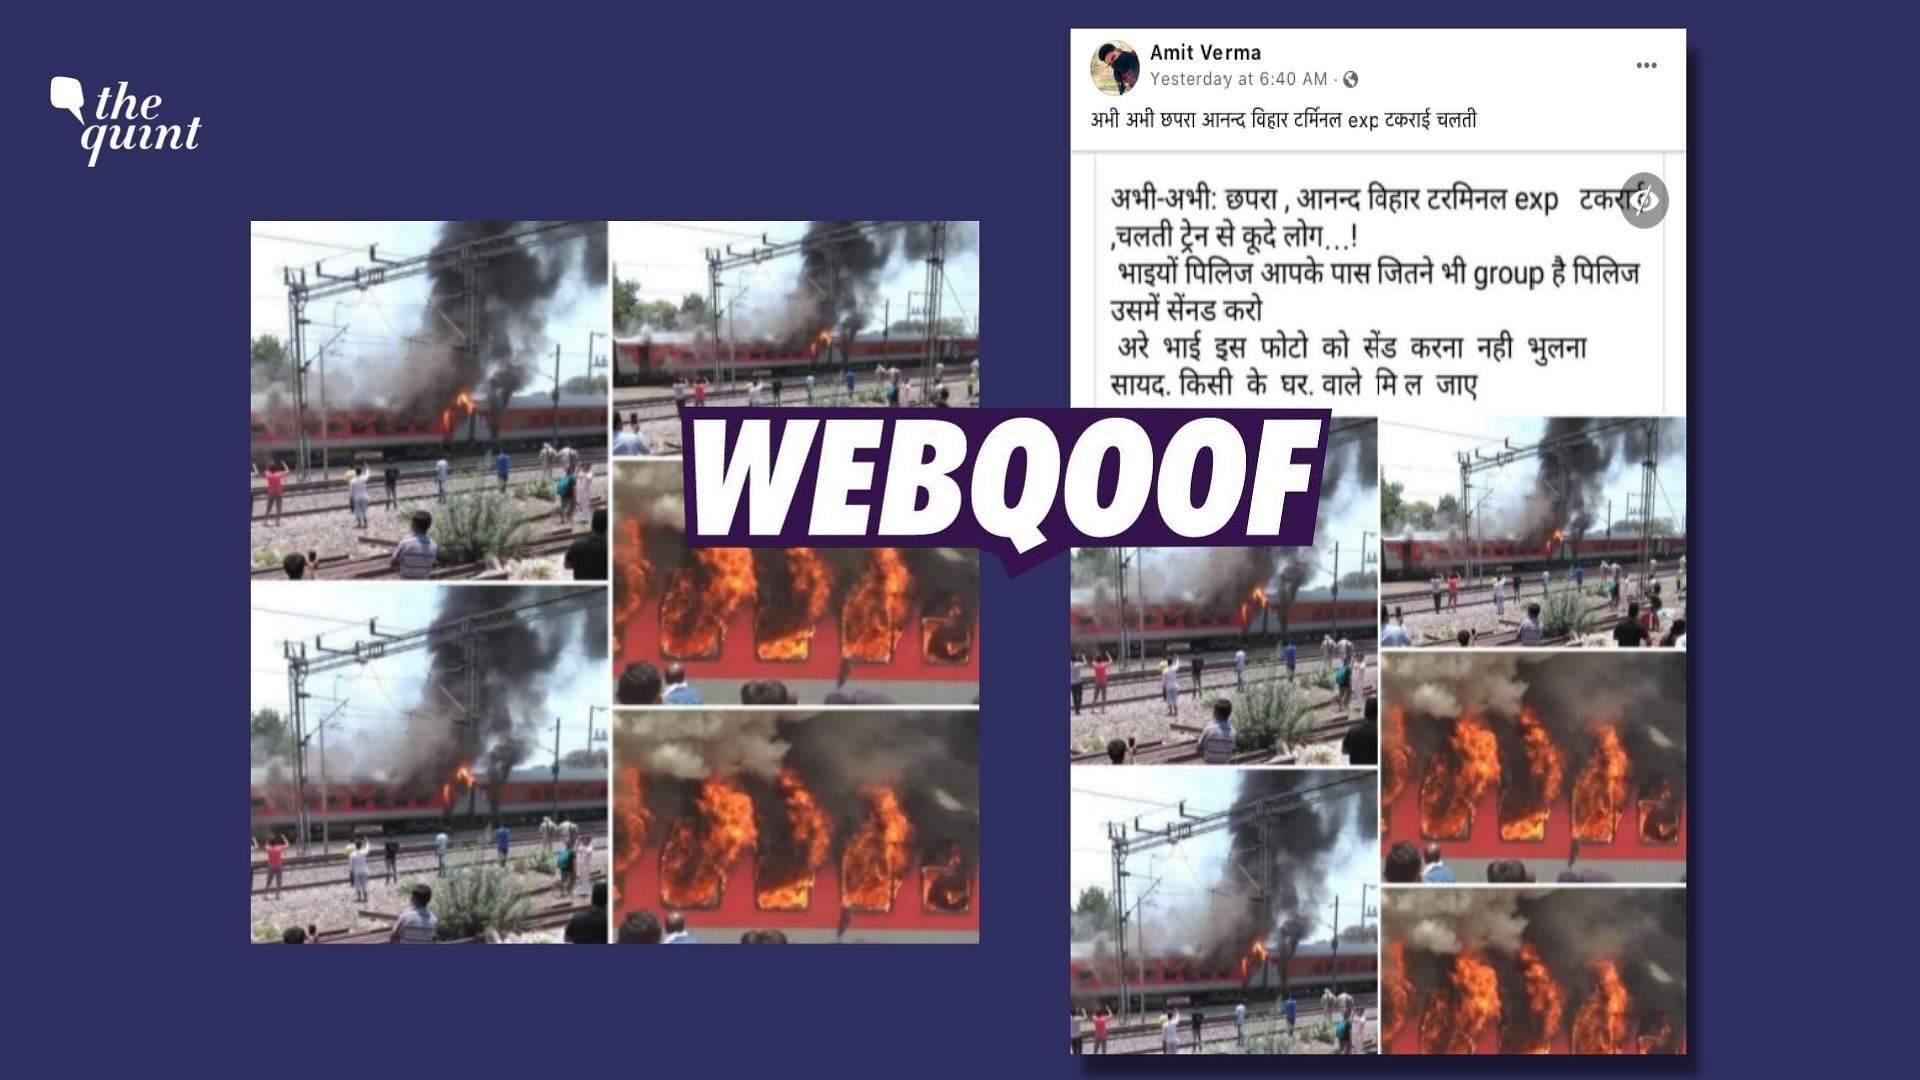 A set of old images have gone viral on Facebook claiming that they show a train from Bihar’s Chhapra to Anand Vihar terminal in New Delhi colliding and catching fire.